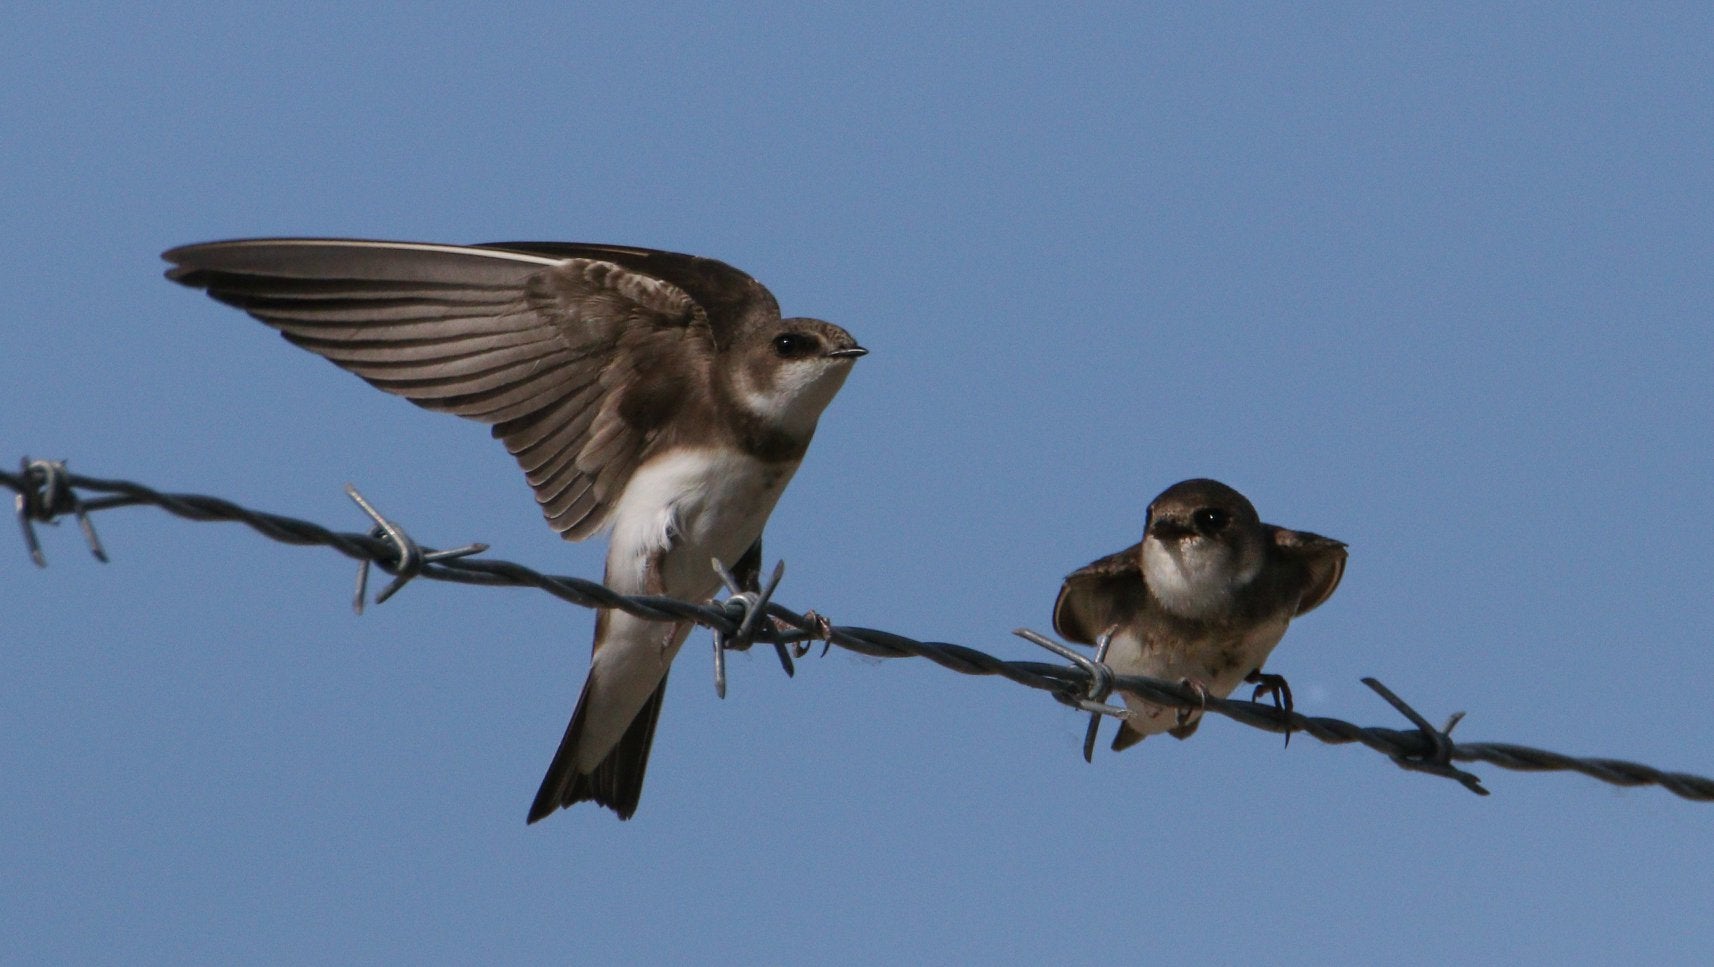 image shows 2 small brown and white birds on a barbed wire fence. One bird has it's wings open an the other one is crouching down